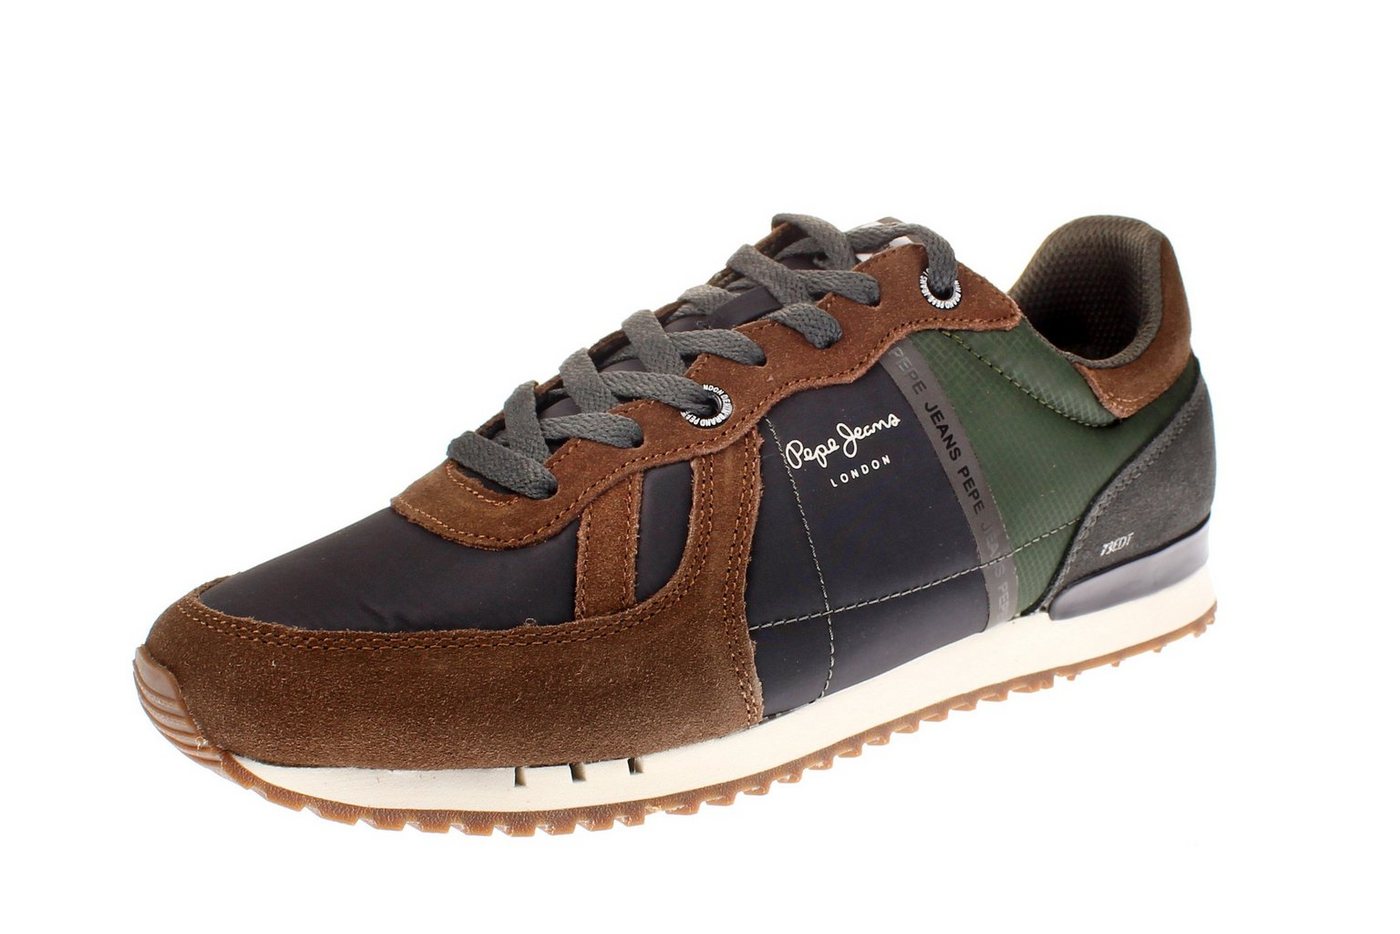 Pepe Jeans pms 30580-884stag-44 Sneaker von Pepe Jeans